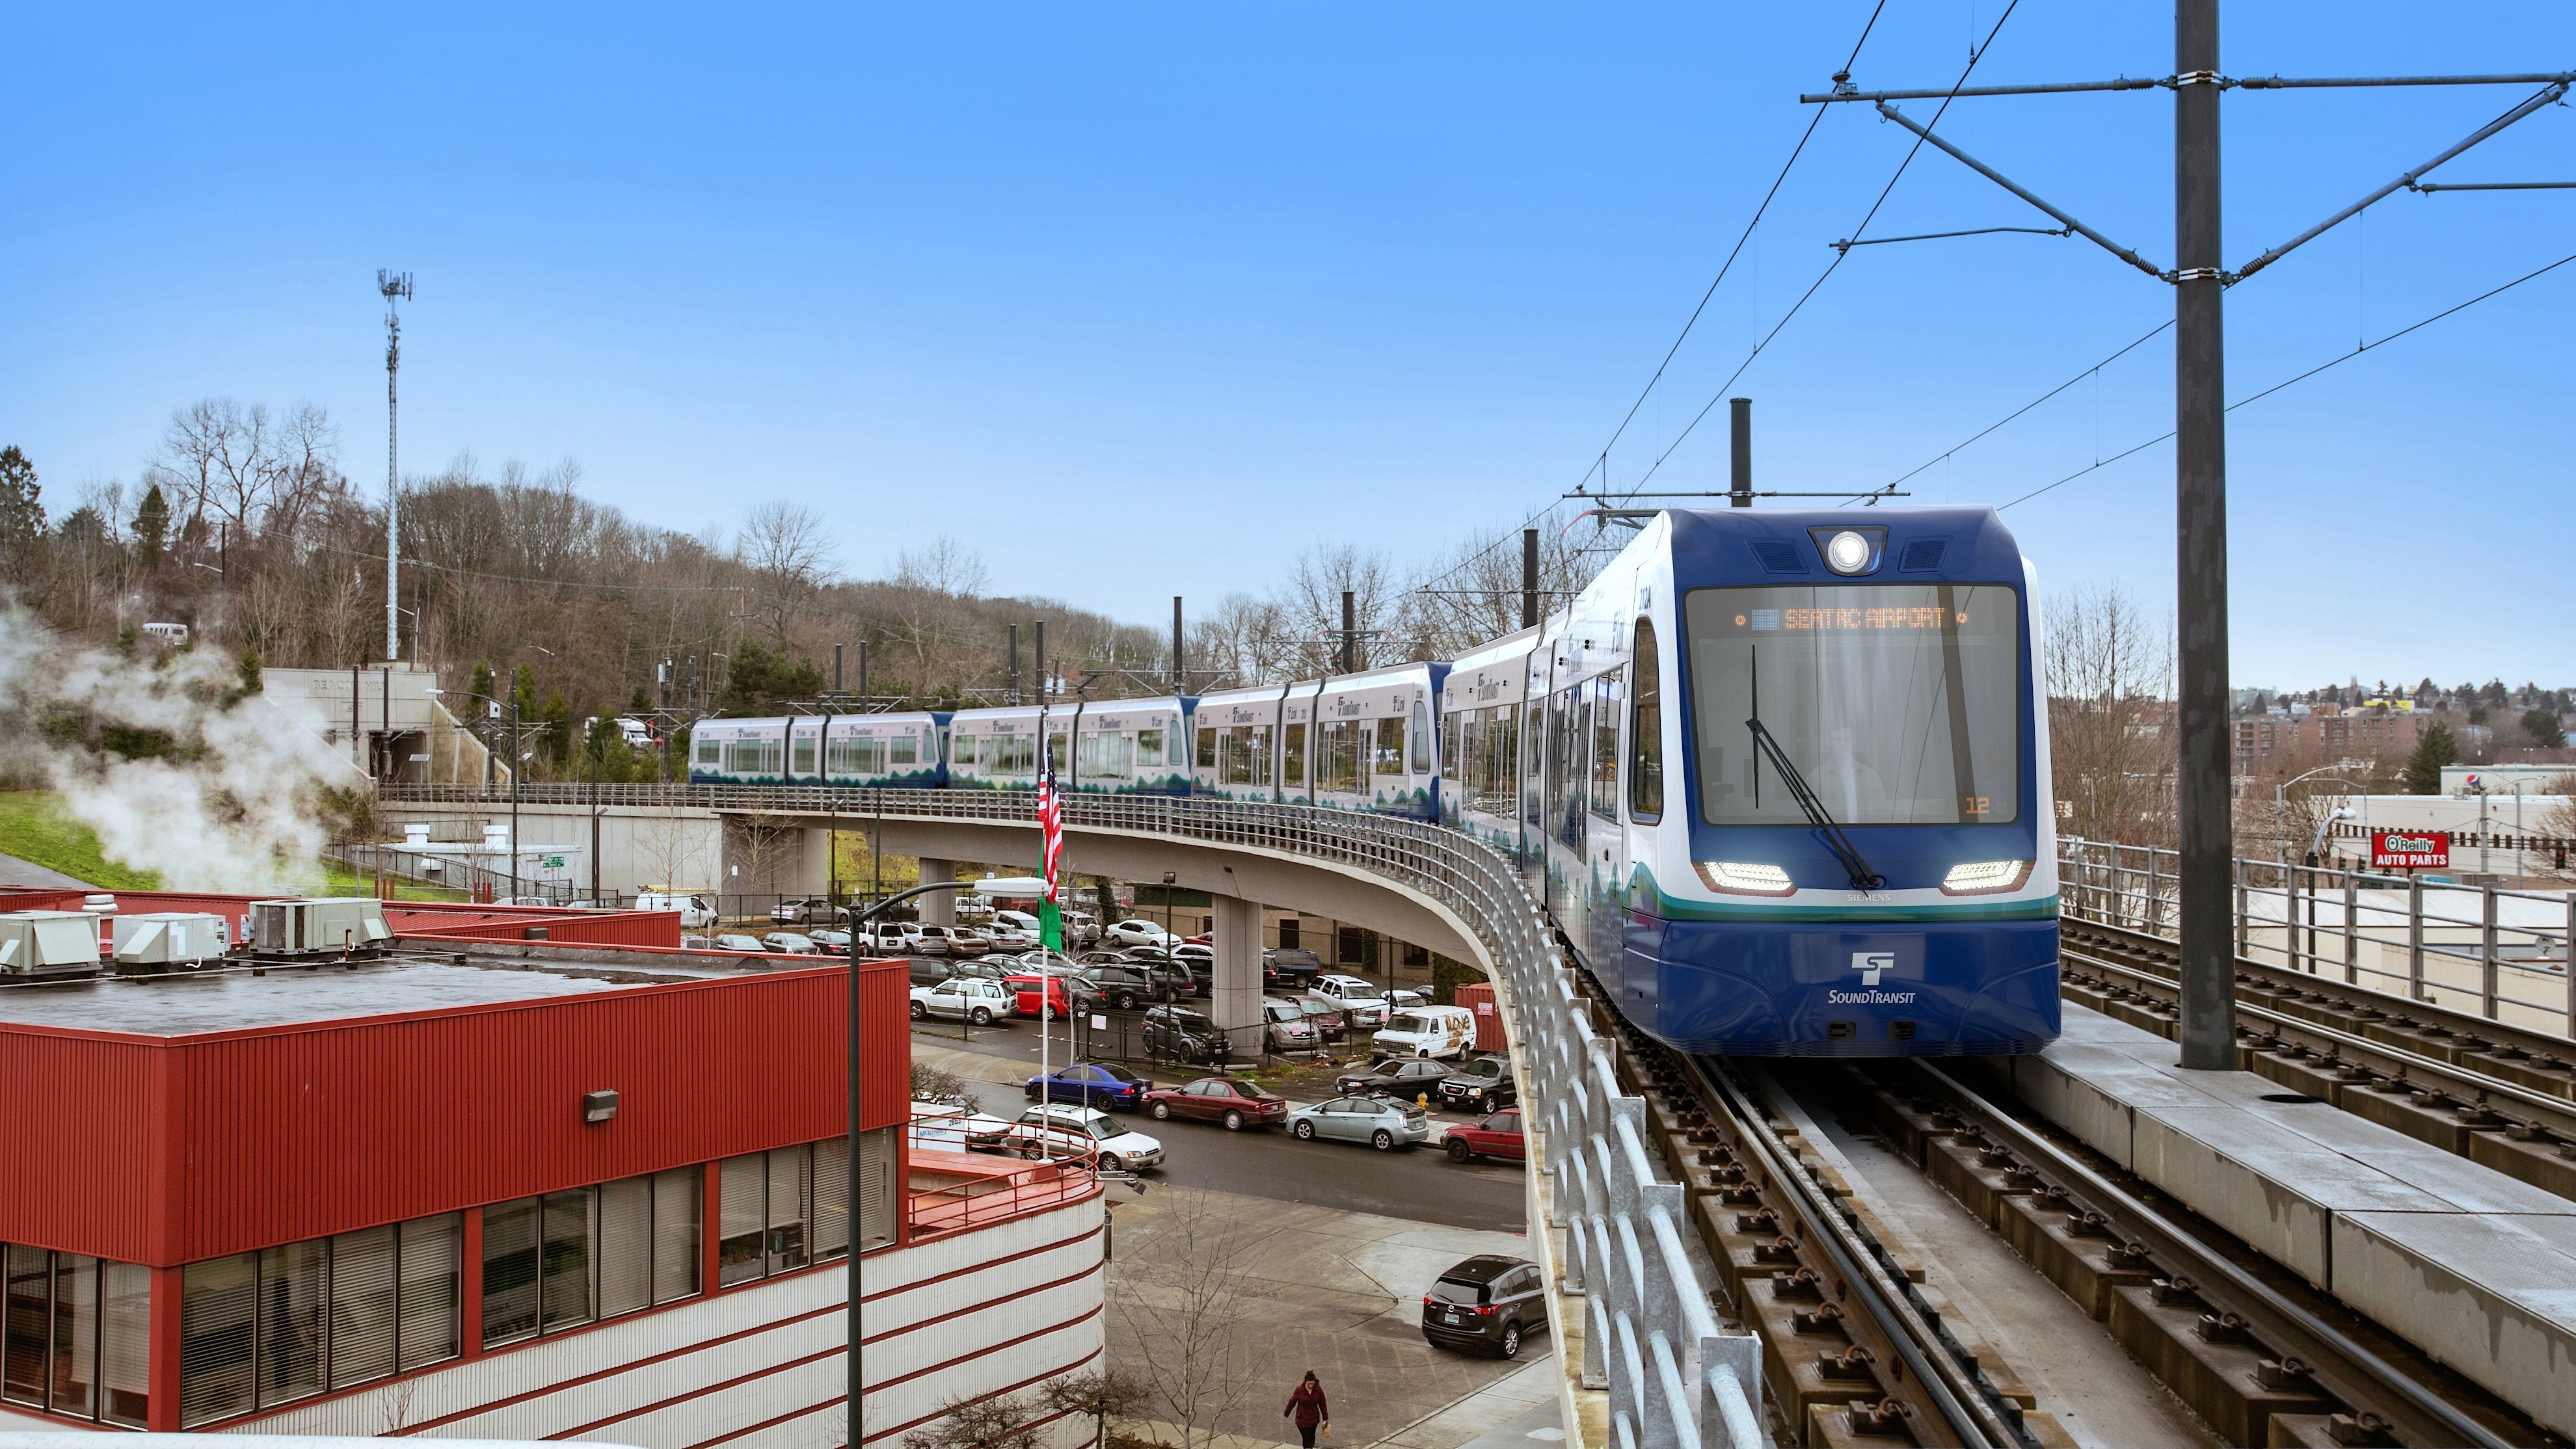 Light rail from Siemens for Seattle and Central Puget Sound area